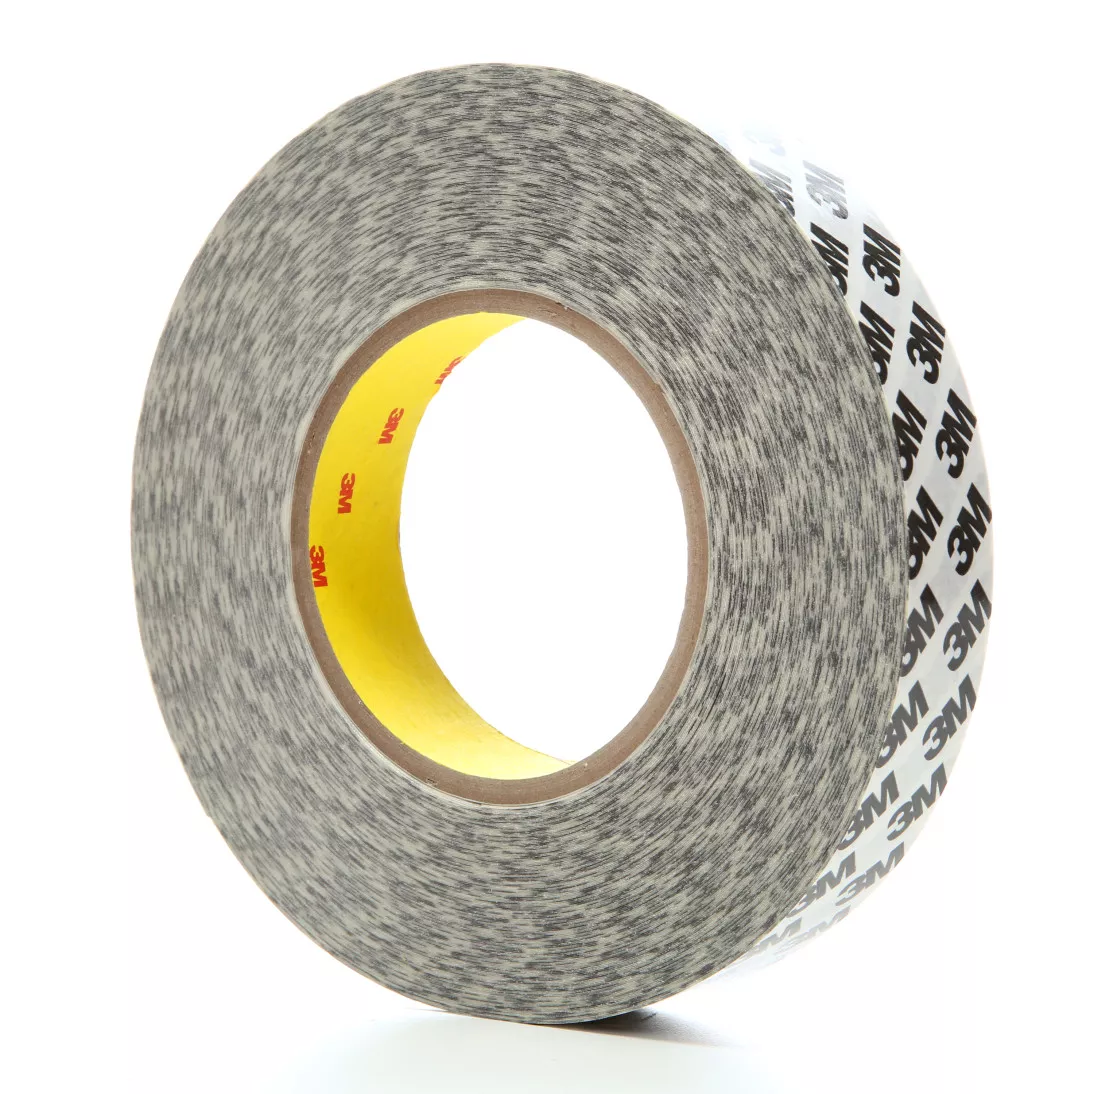 3M™ High Performance Double Coated Tape 9086, White, 1 in x 55 yd, 7.5
mil, 18 rolls per case